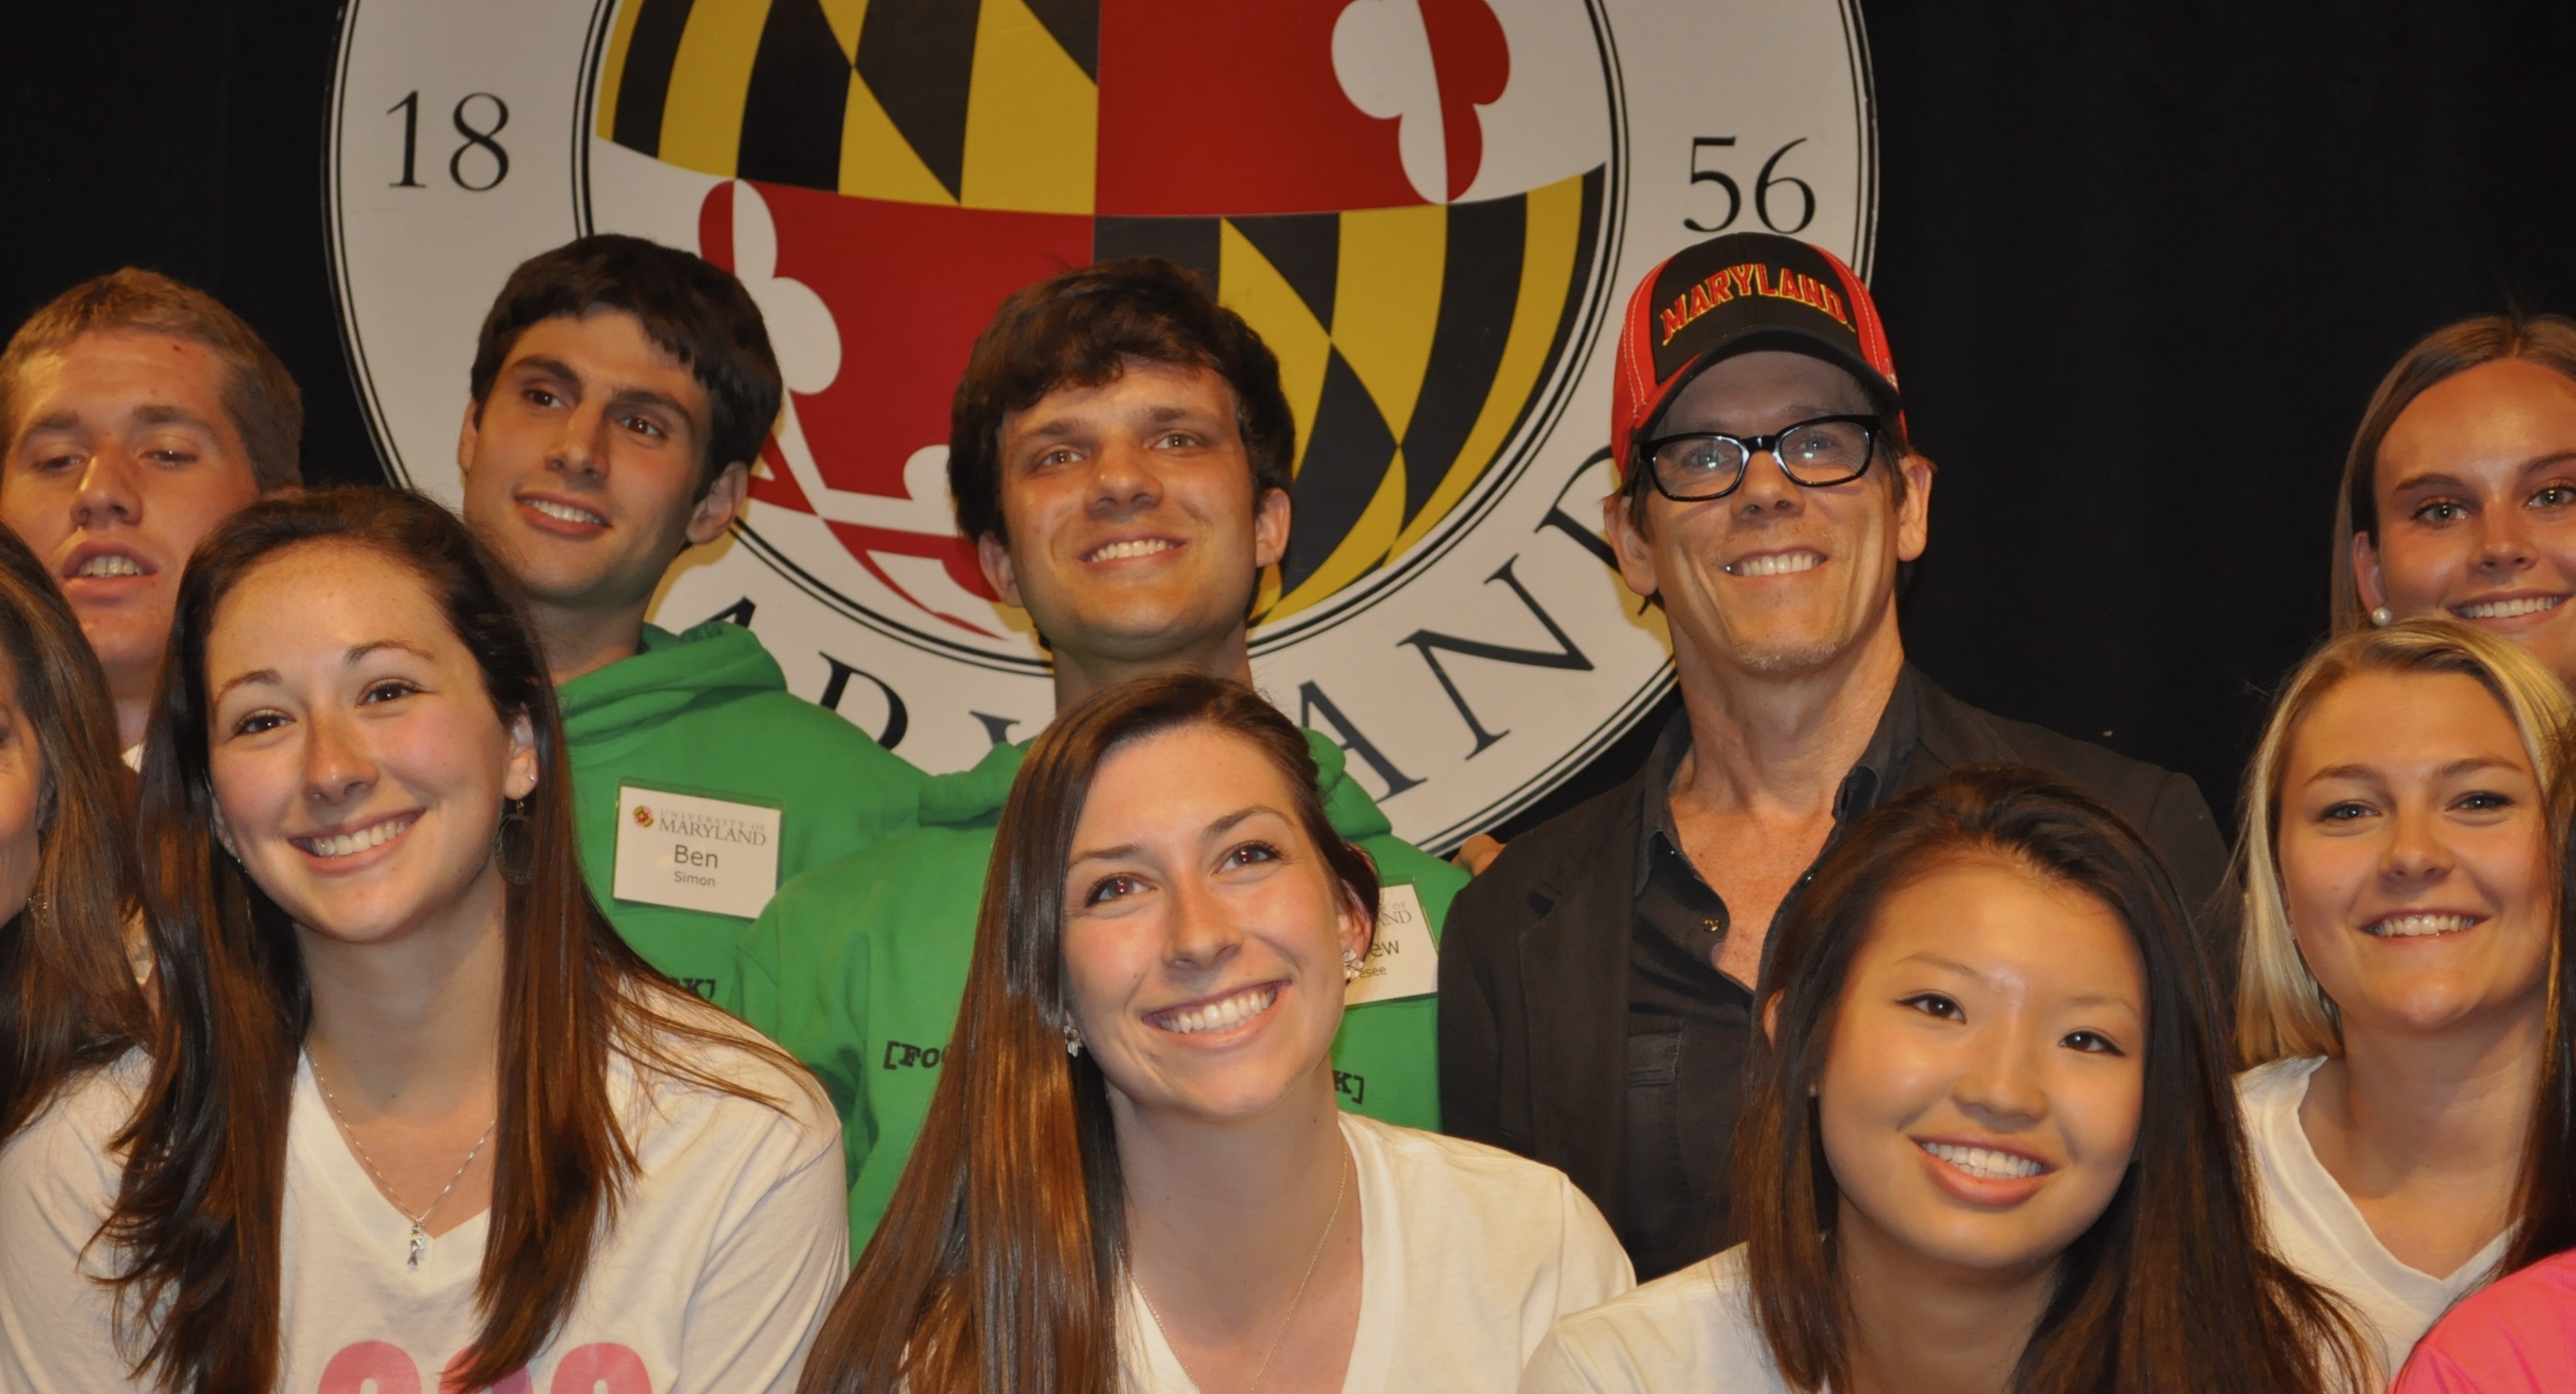 Kevin Bacon poses with winners of "Do Good Challenge"